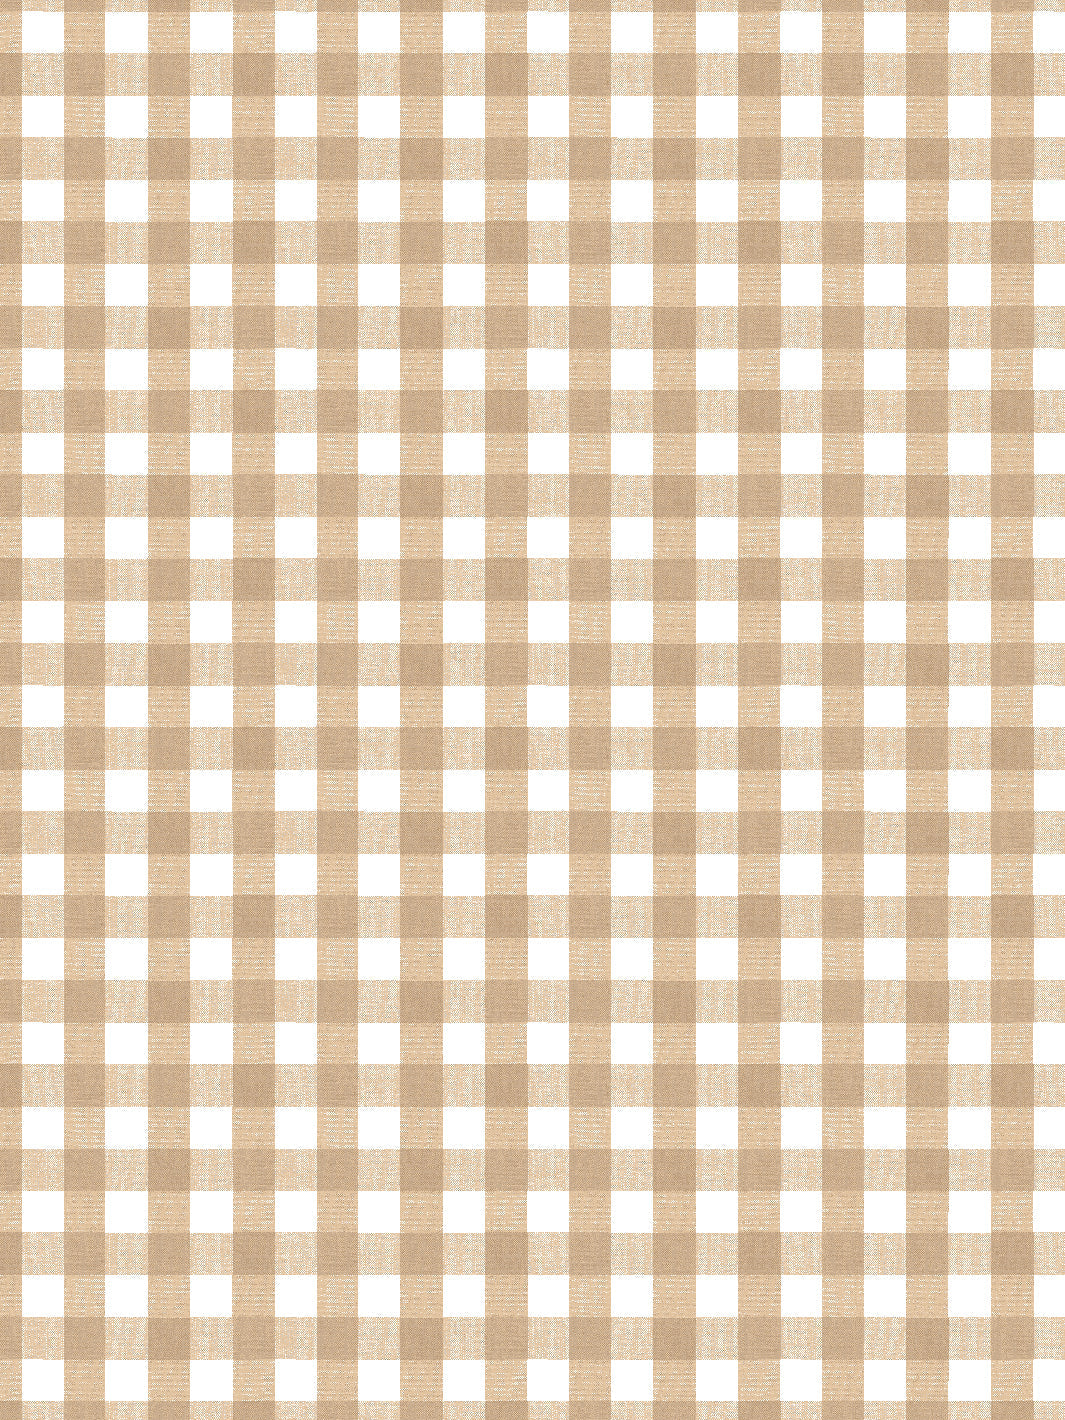 'Pixie Gingham' Wallpaper by Sarah Jessica Parker - Sable